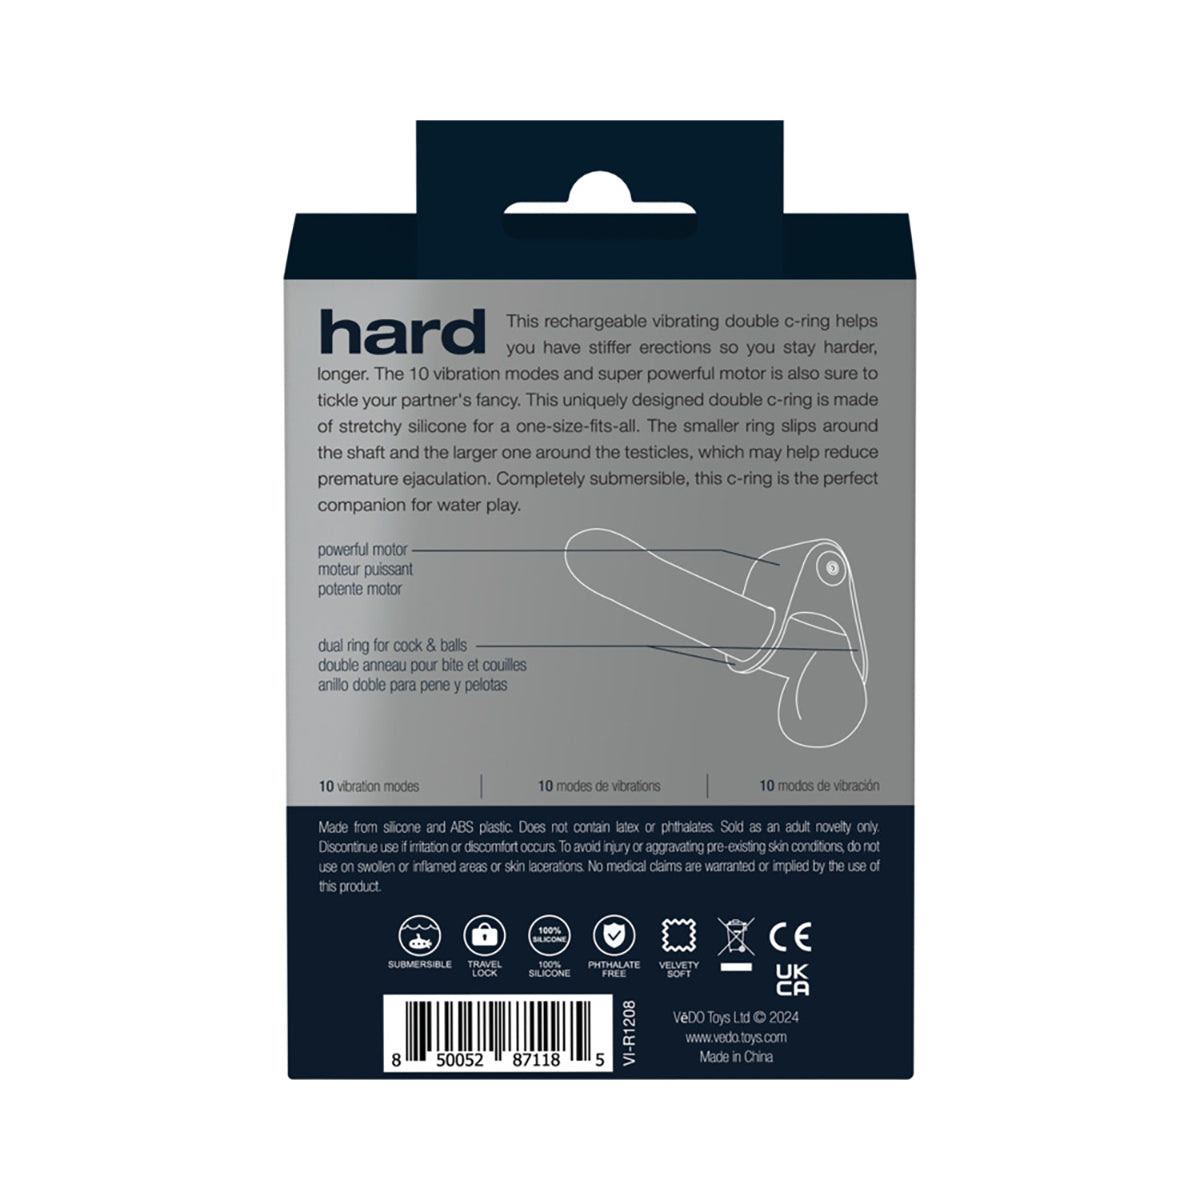 VeDO Hard Rechargeable C-Ring Black